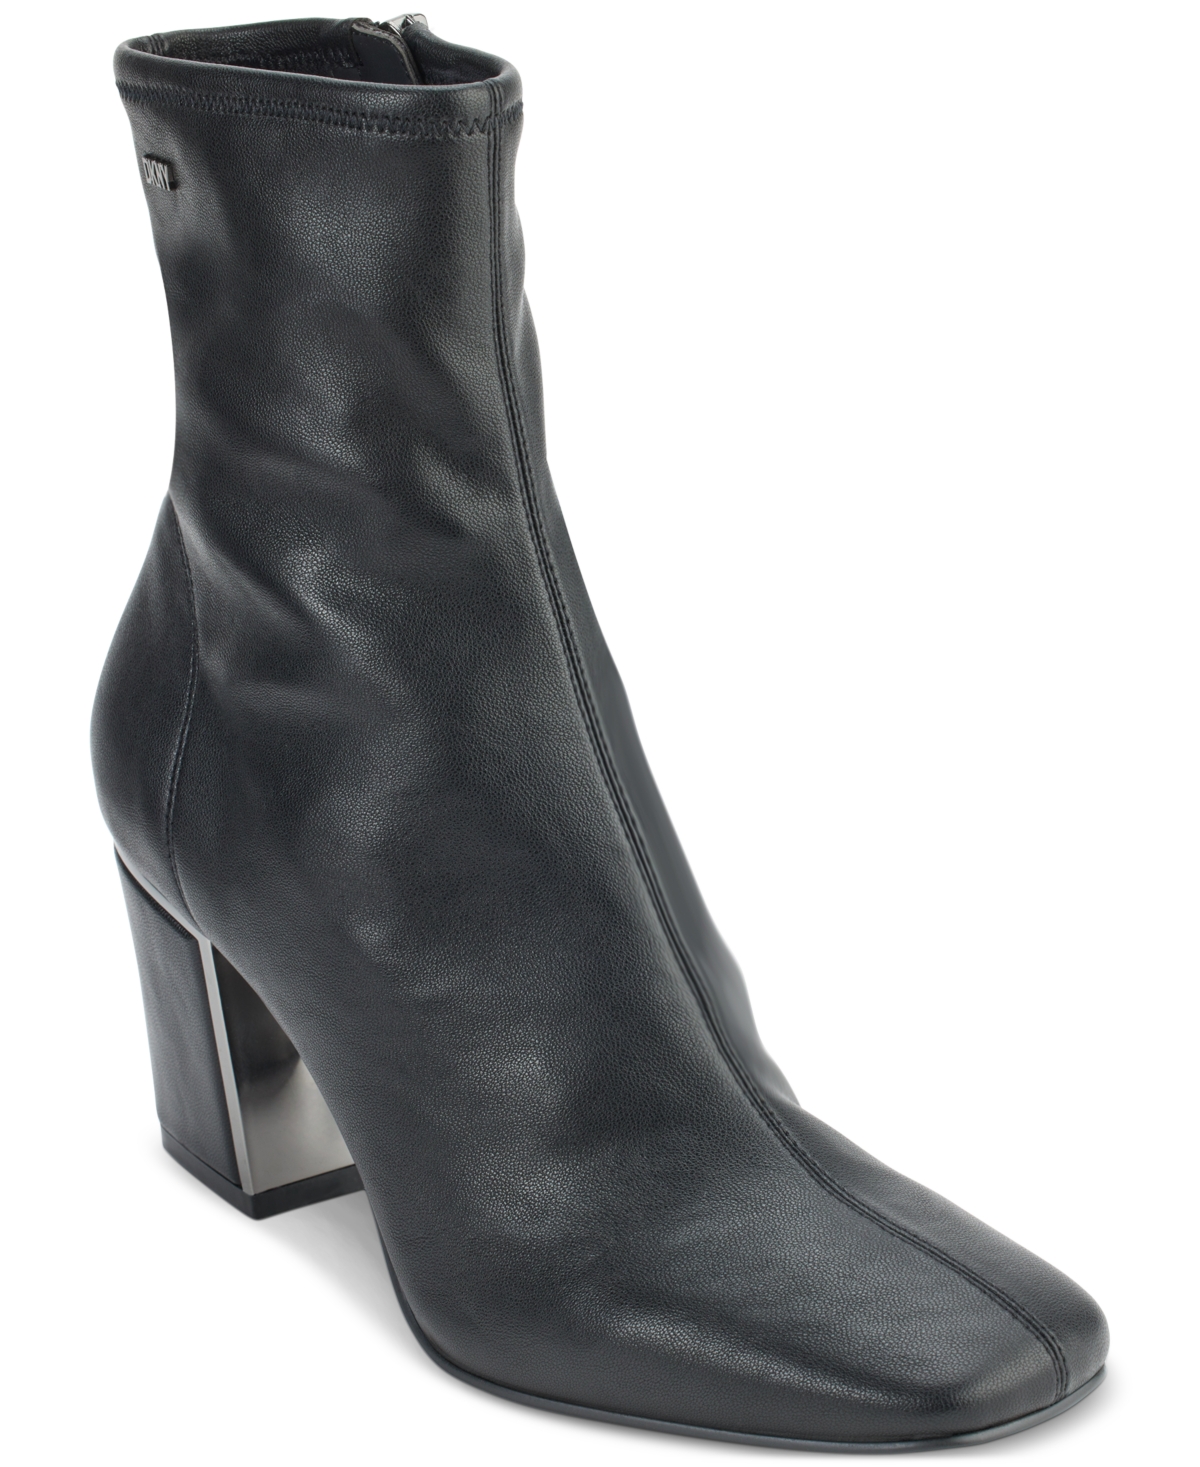 Women's Cavale Stretch Booties - Black Smooth